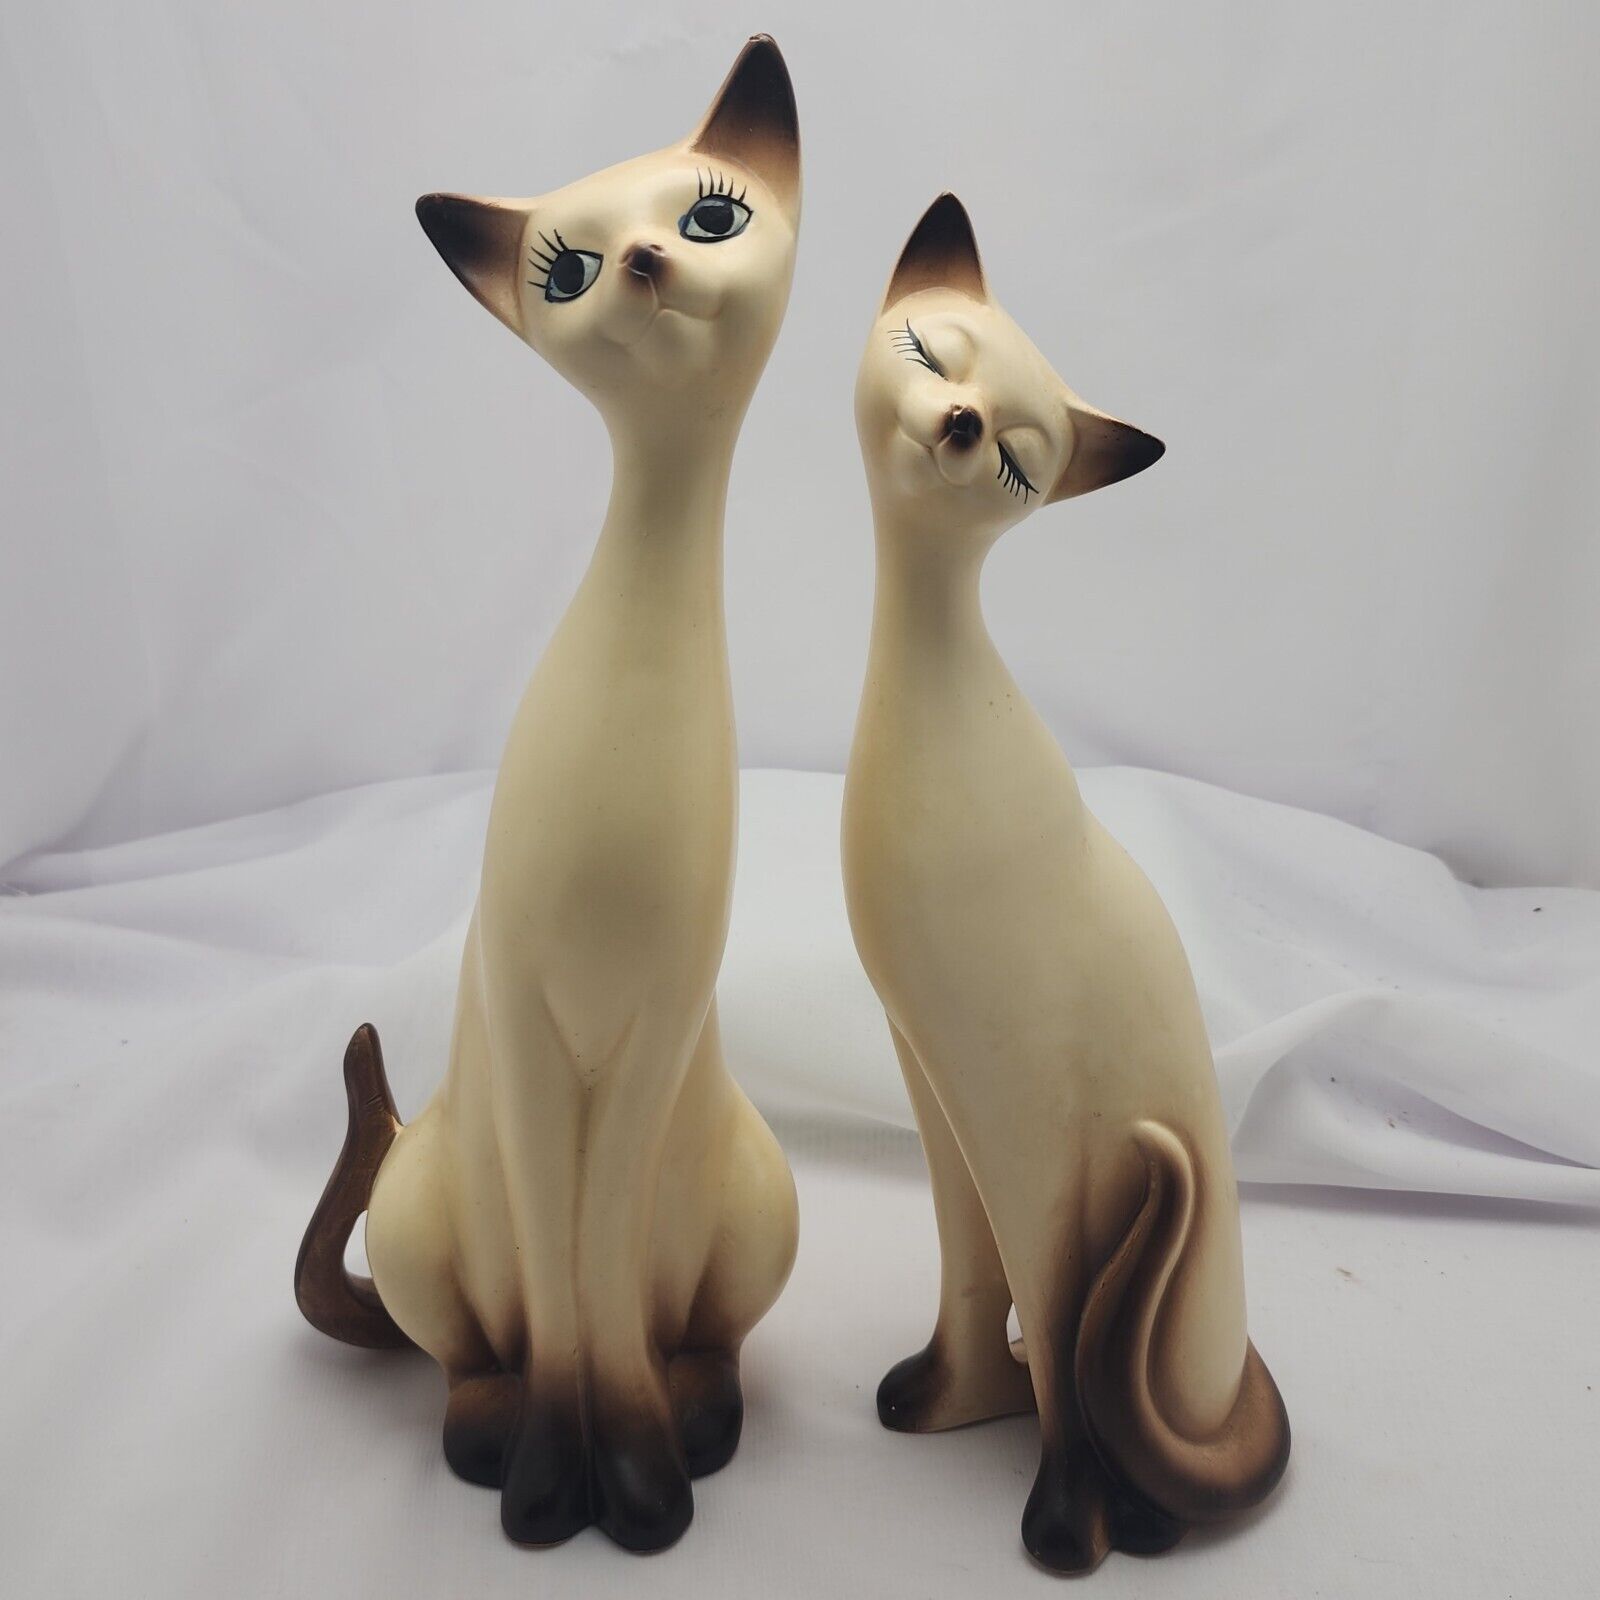 Atomic MCM Napcoware Siamese Cat Statues Pair Tall Long Neck Vintage Kitschy